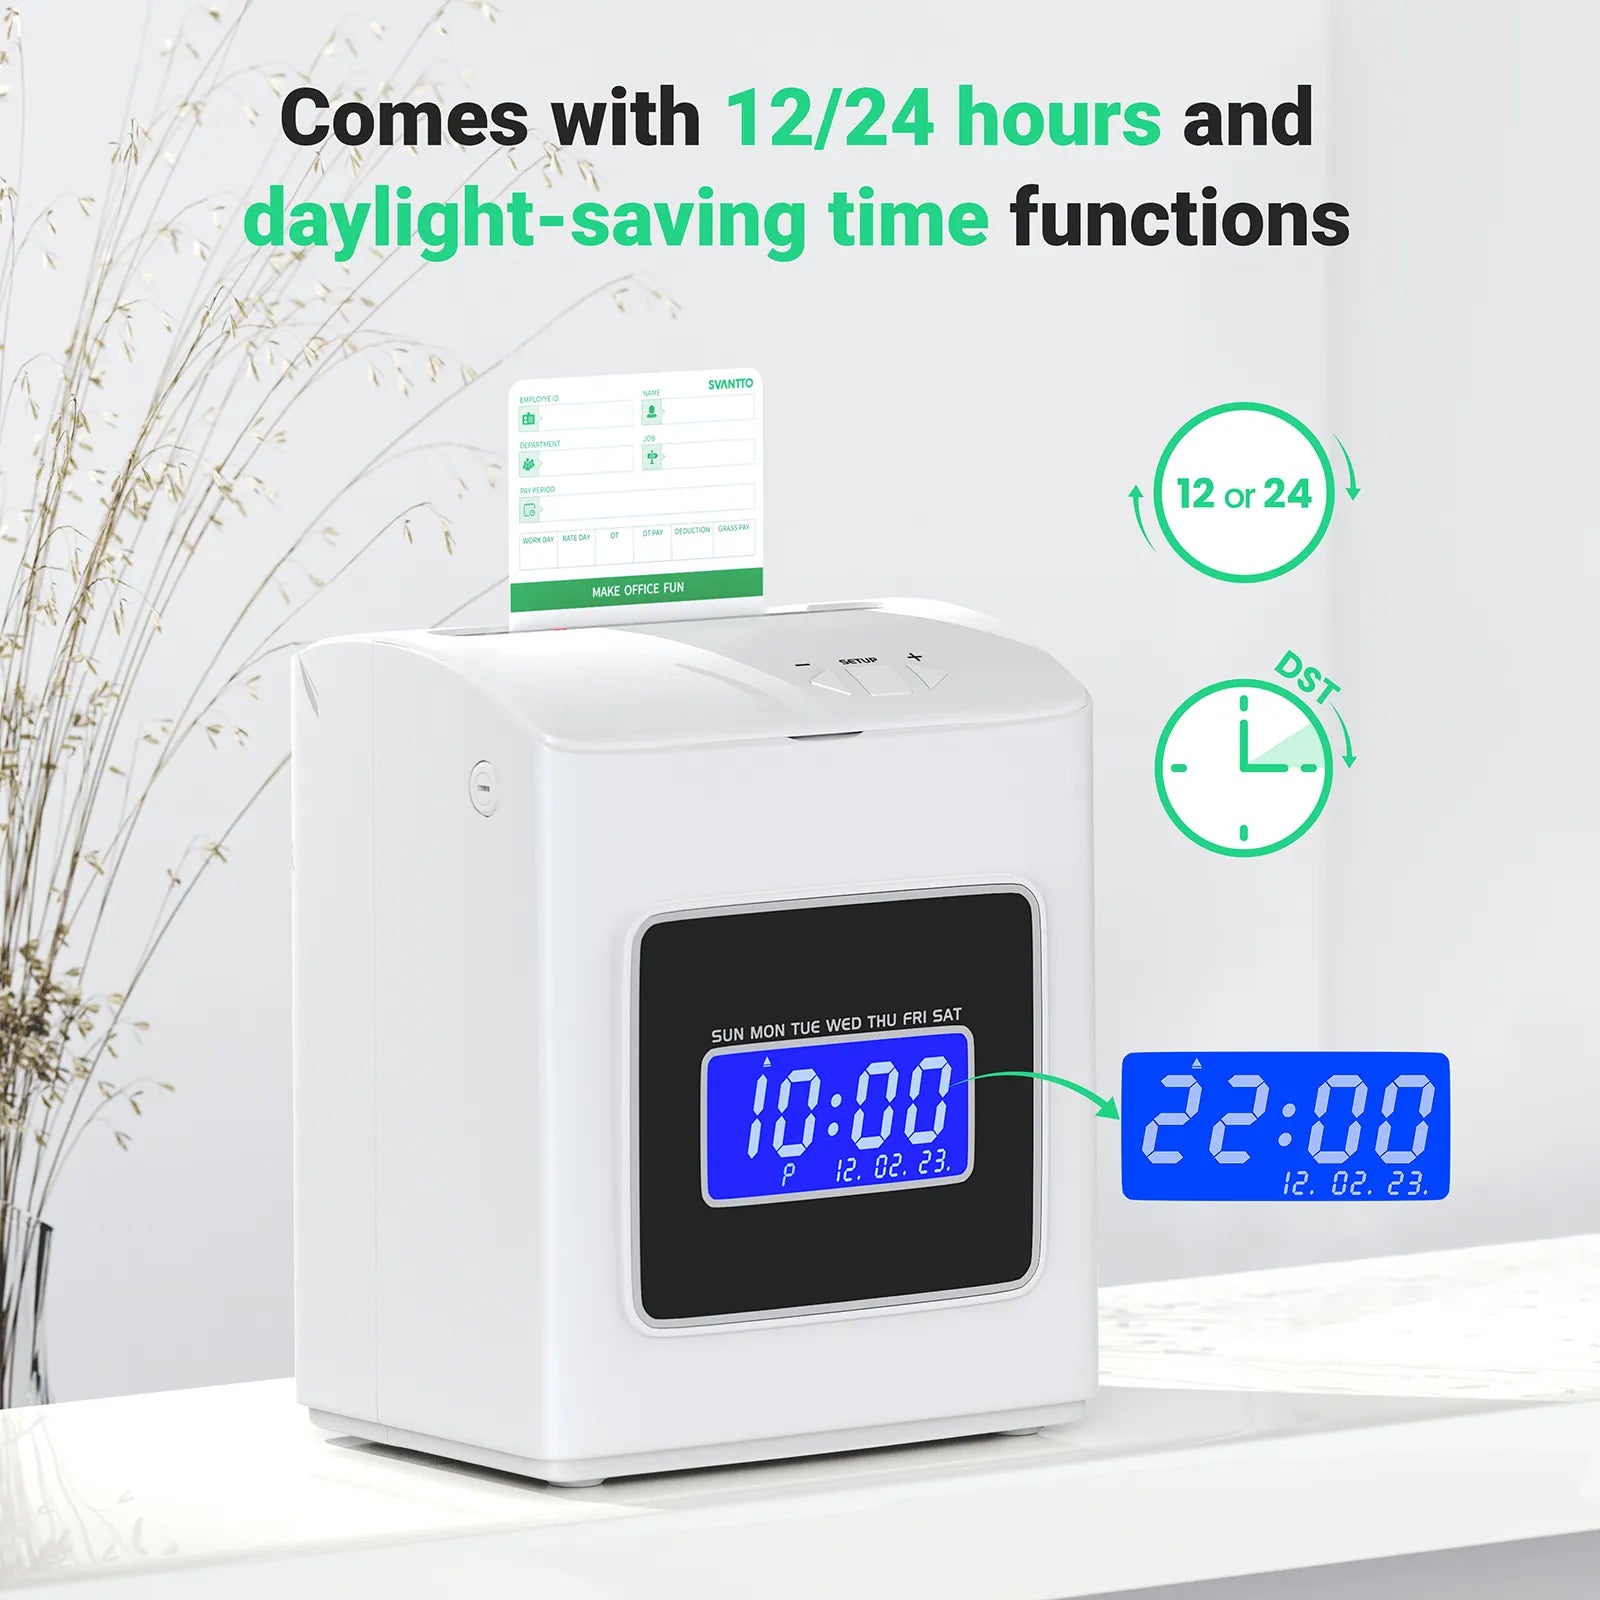 SVANTTO time card punch machine comes with 12/24 hours and daylight-saving time functions.